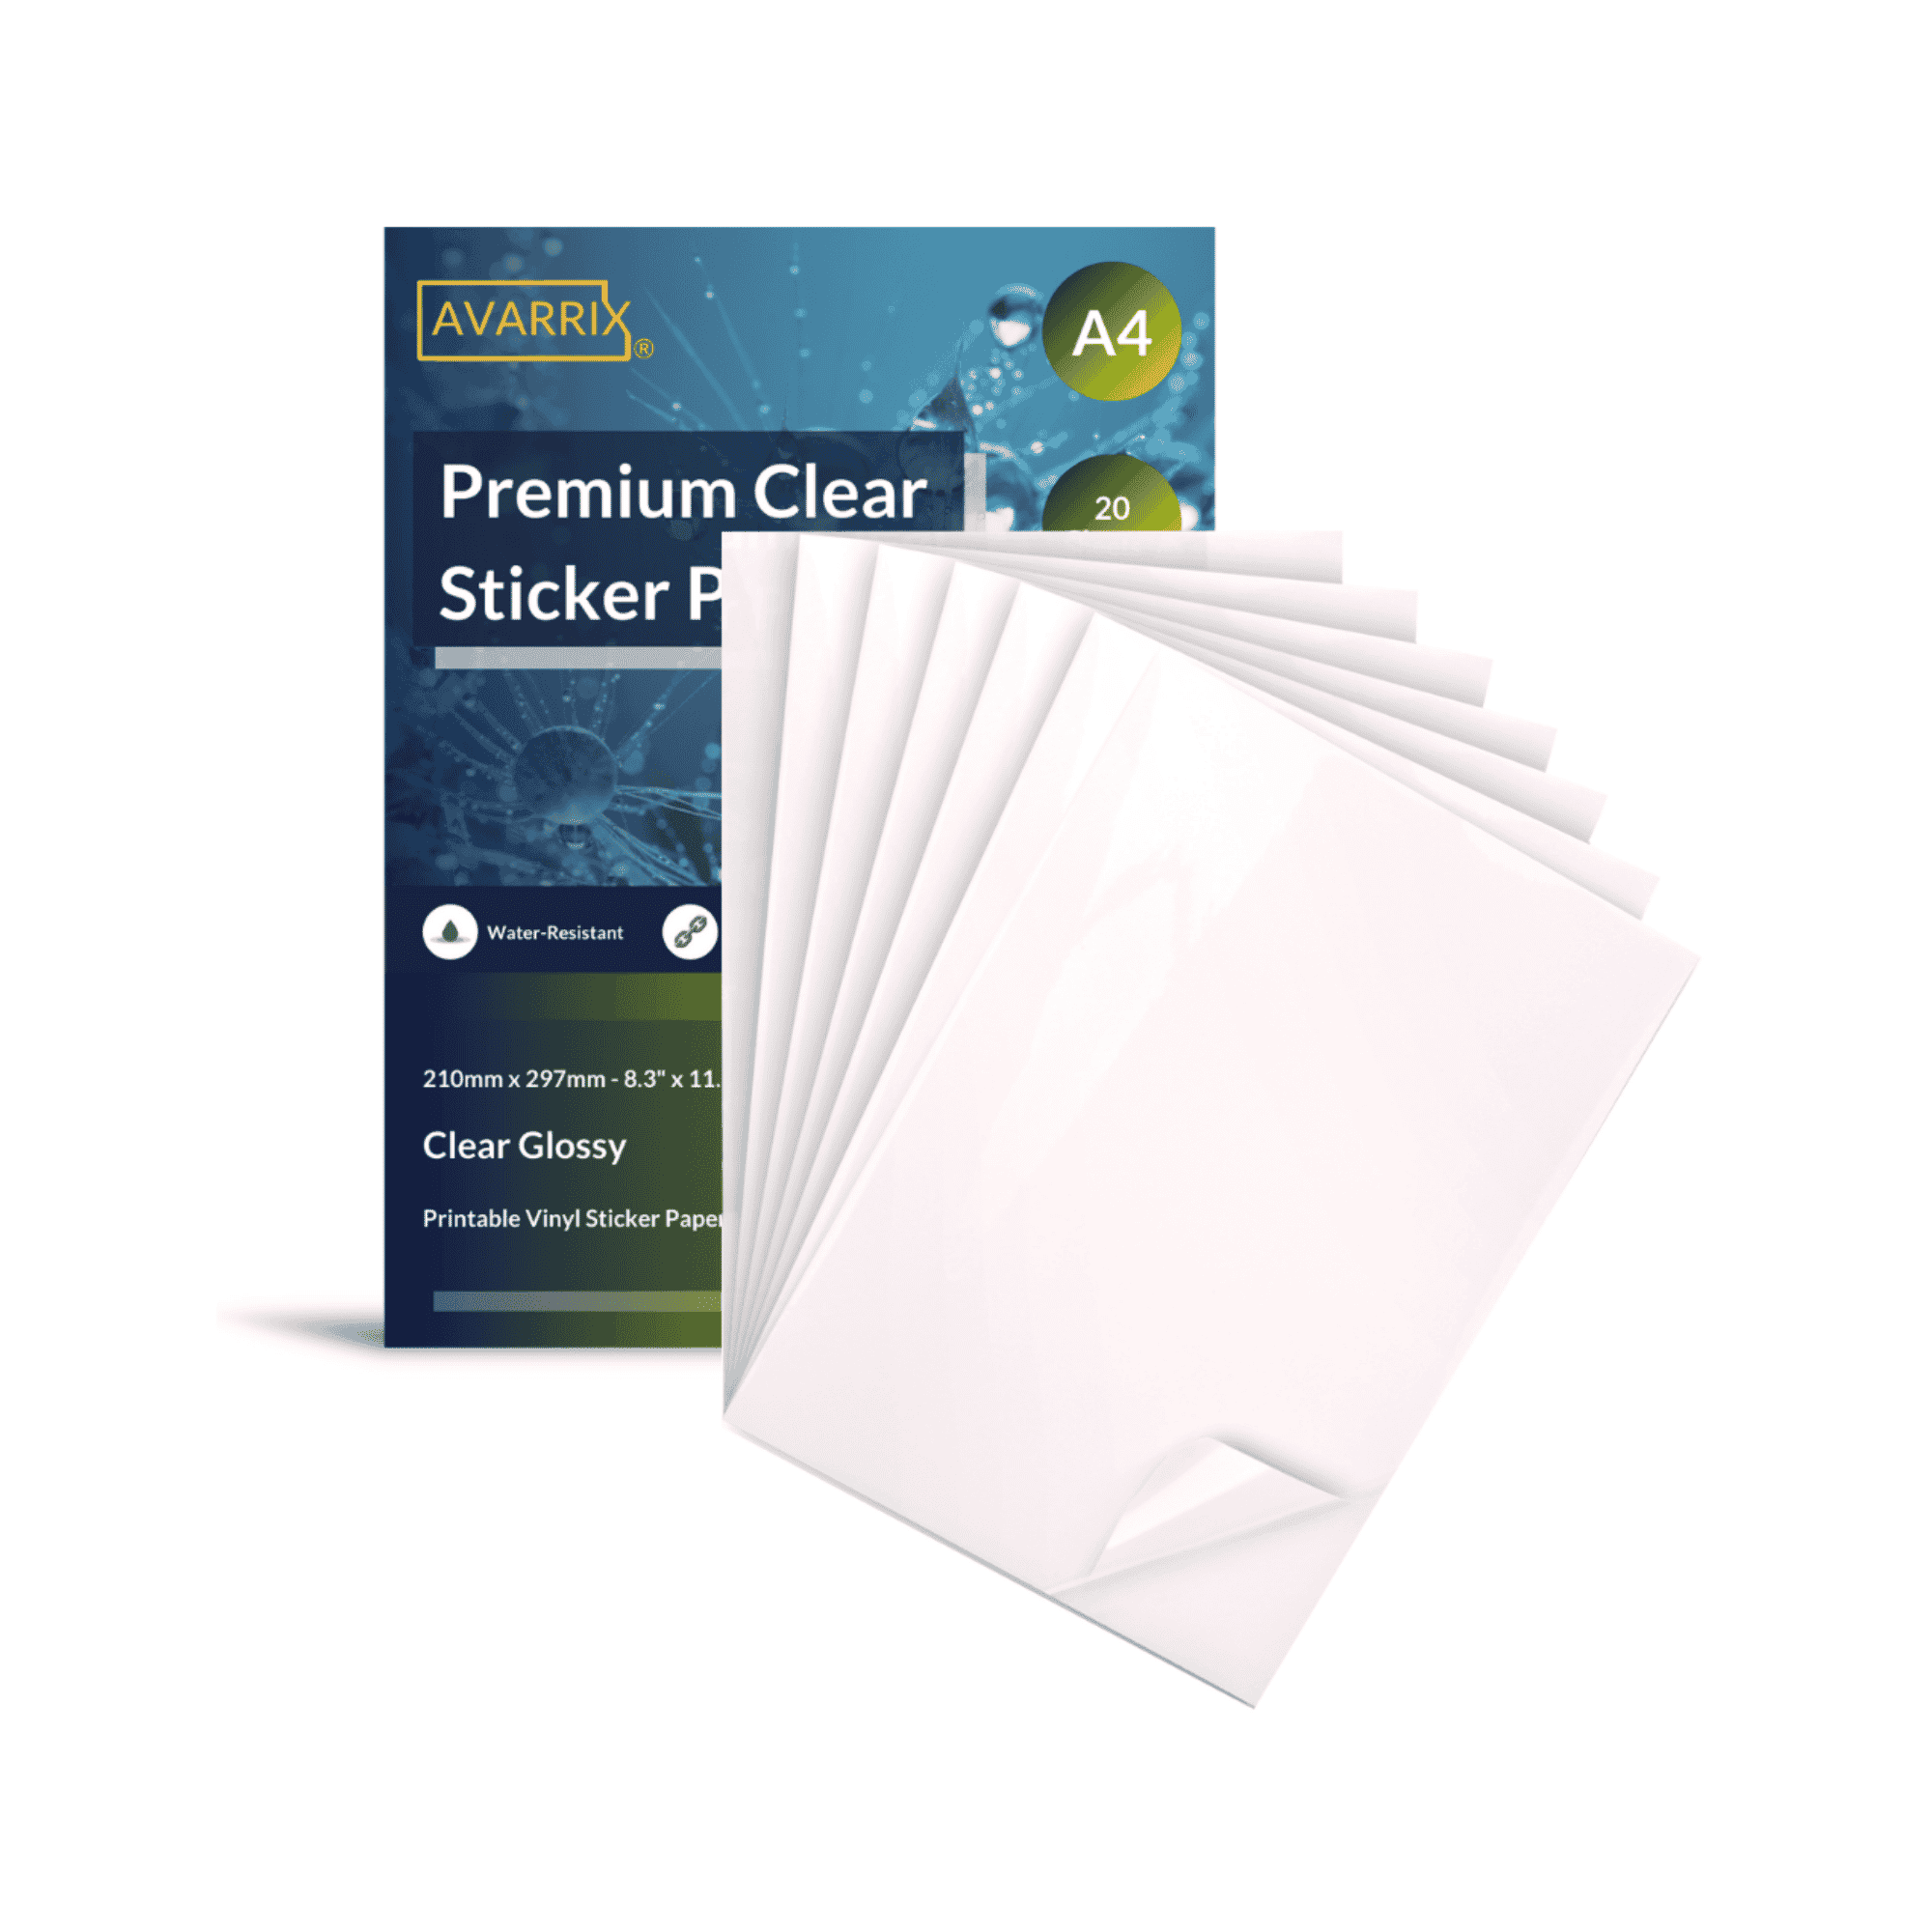 Clear Sticker Paper for Inkjet Printer - 15 Sheets (8.5 x 11) Translucent  Waterproof Printable Vinyl Sticker Paper for DIY Personalized Stickers